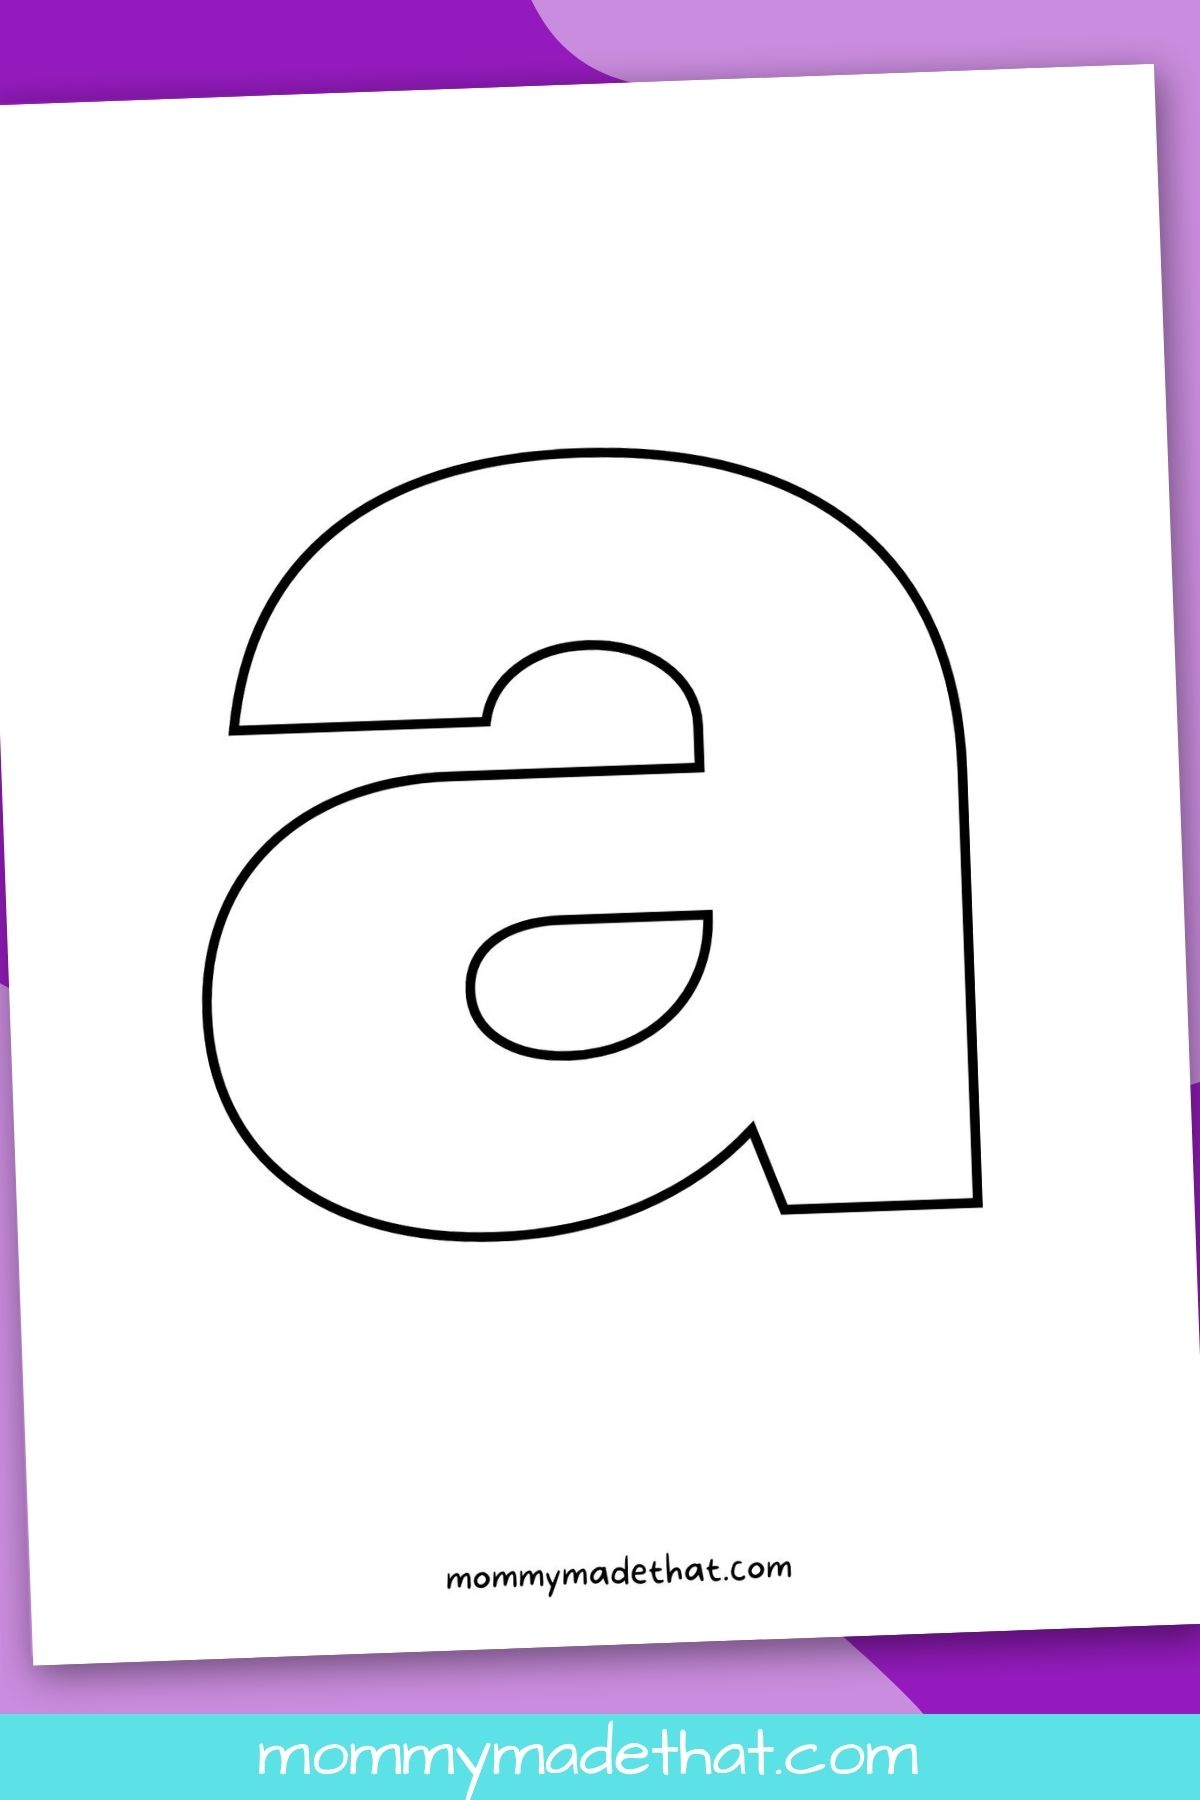 printable letter a